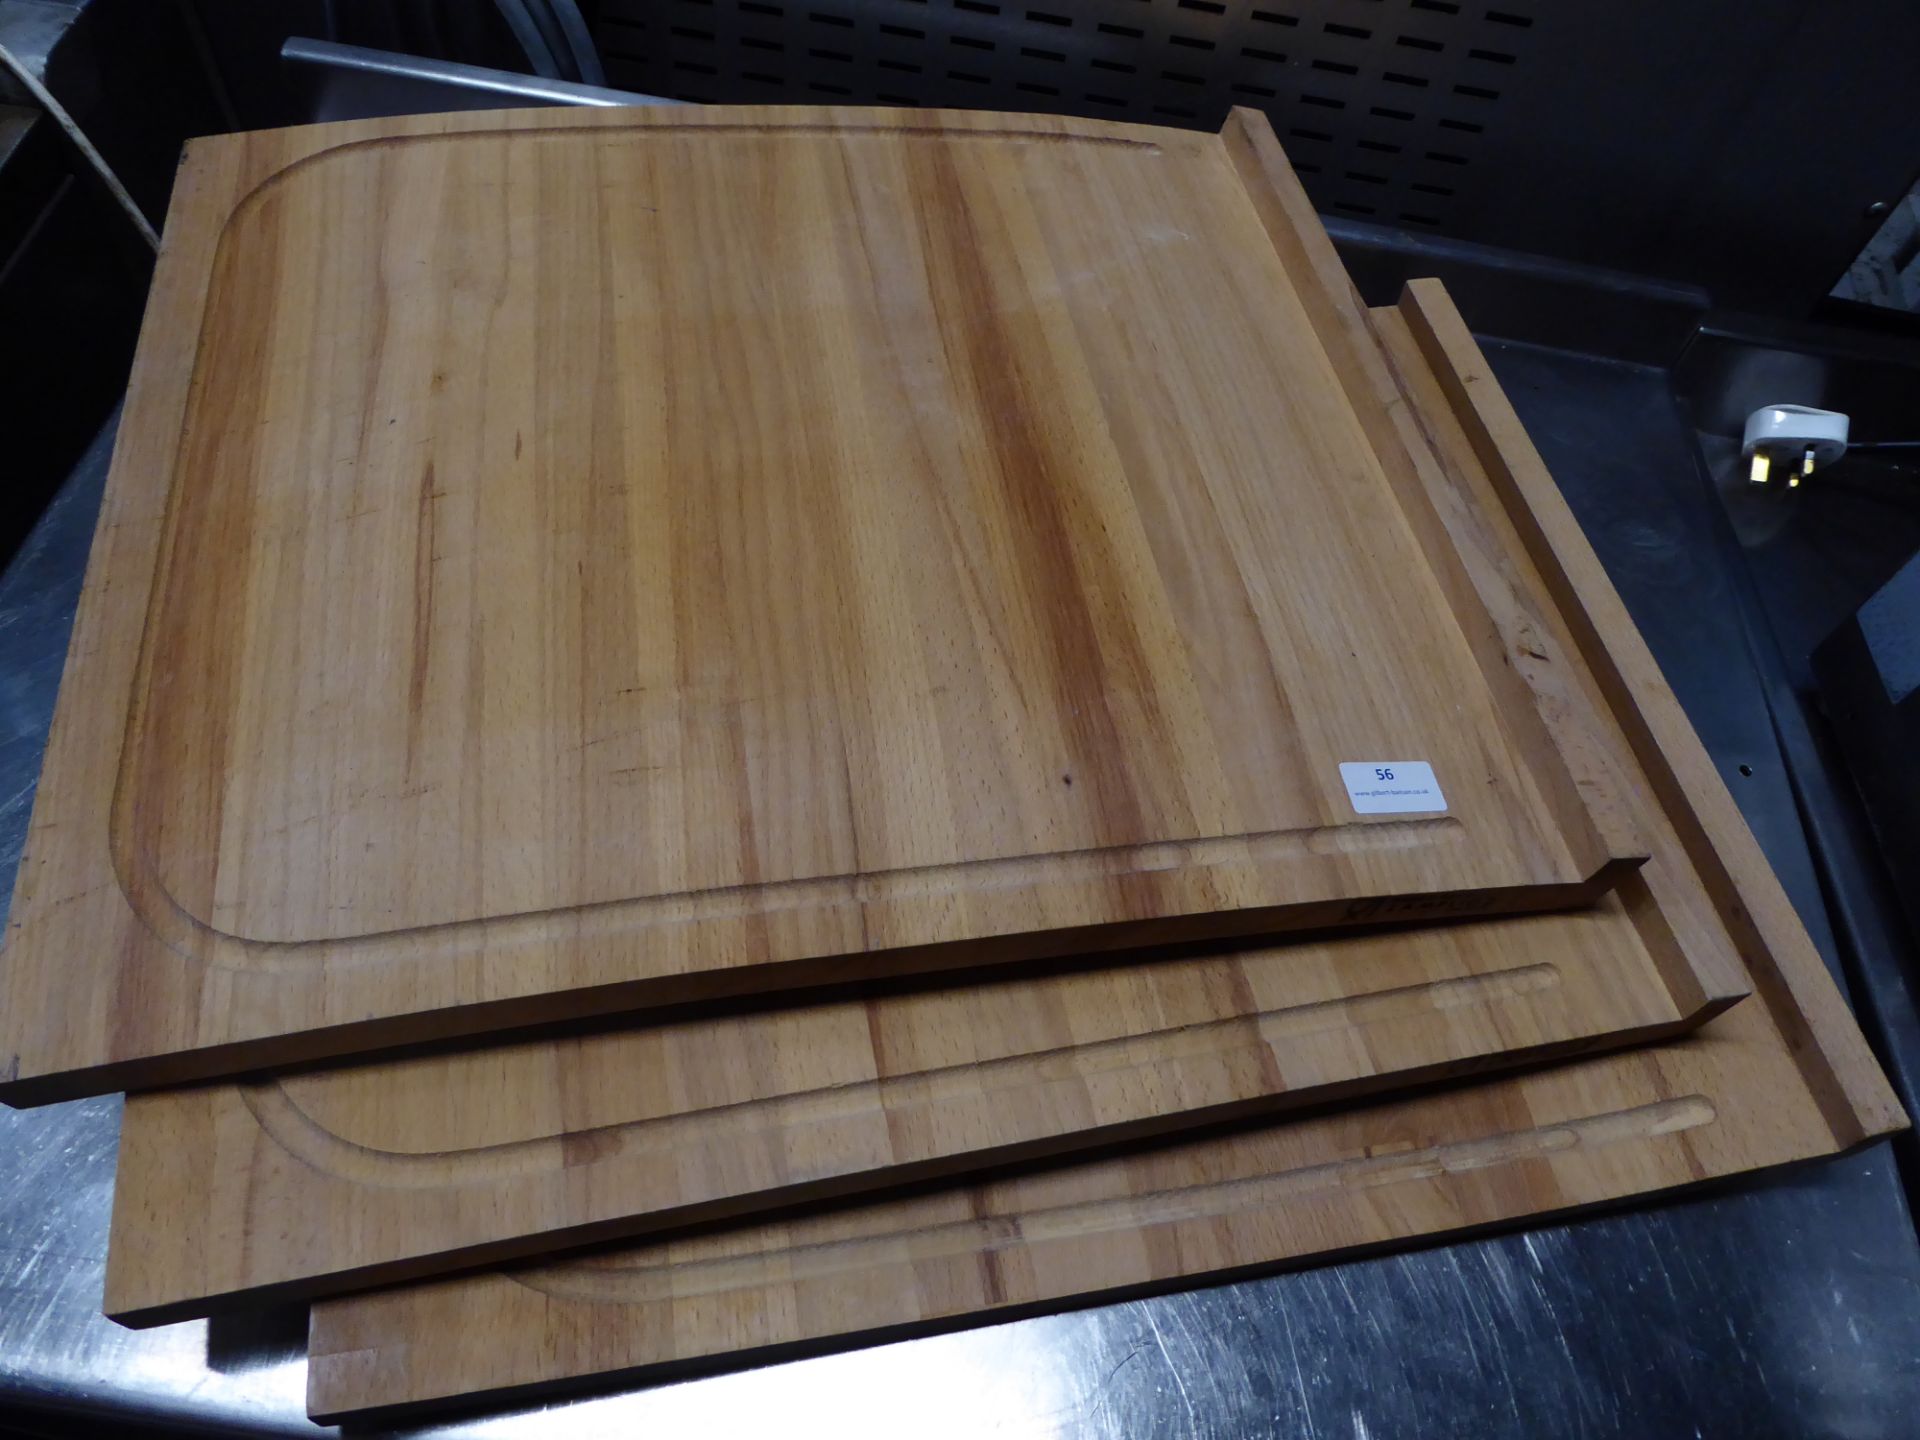 *3 x large wooden boards